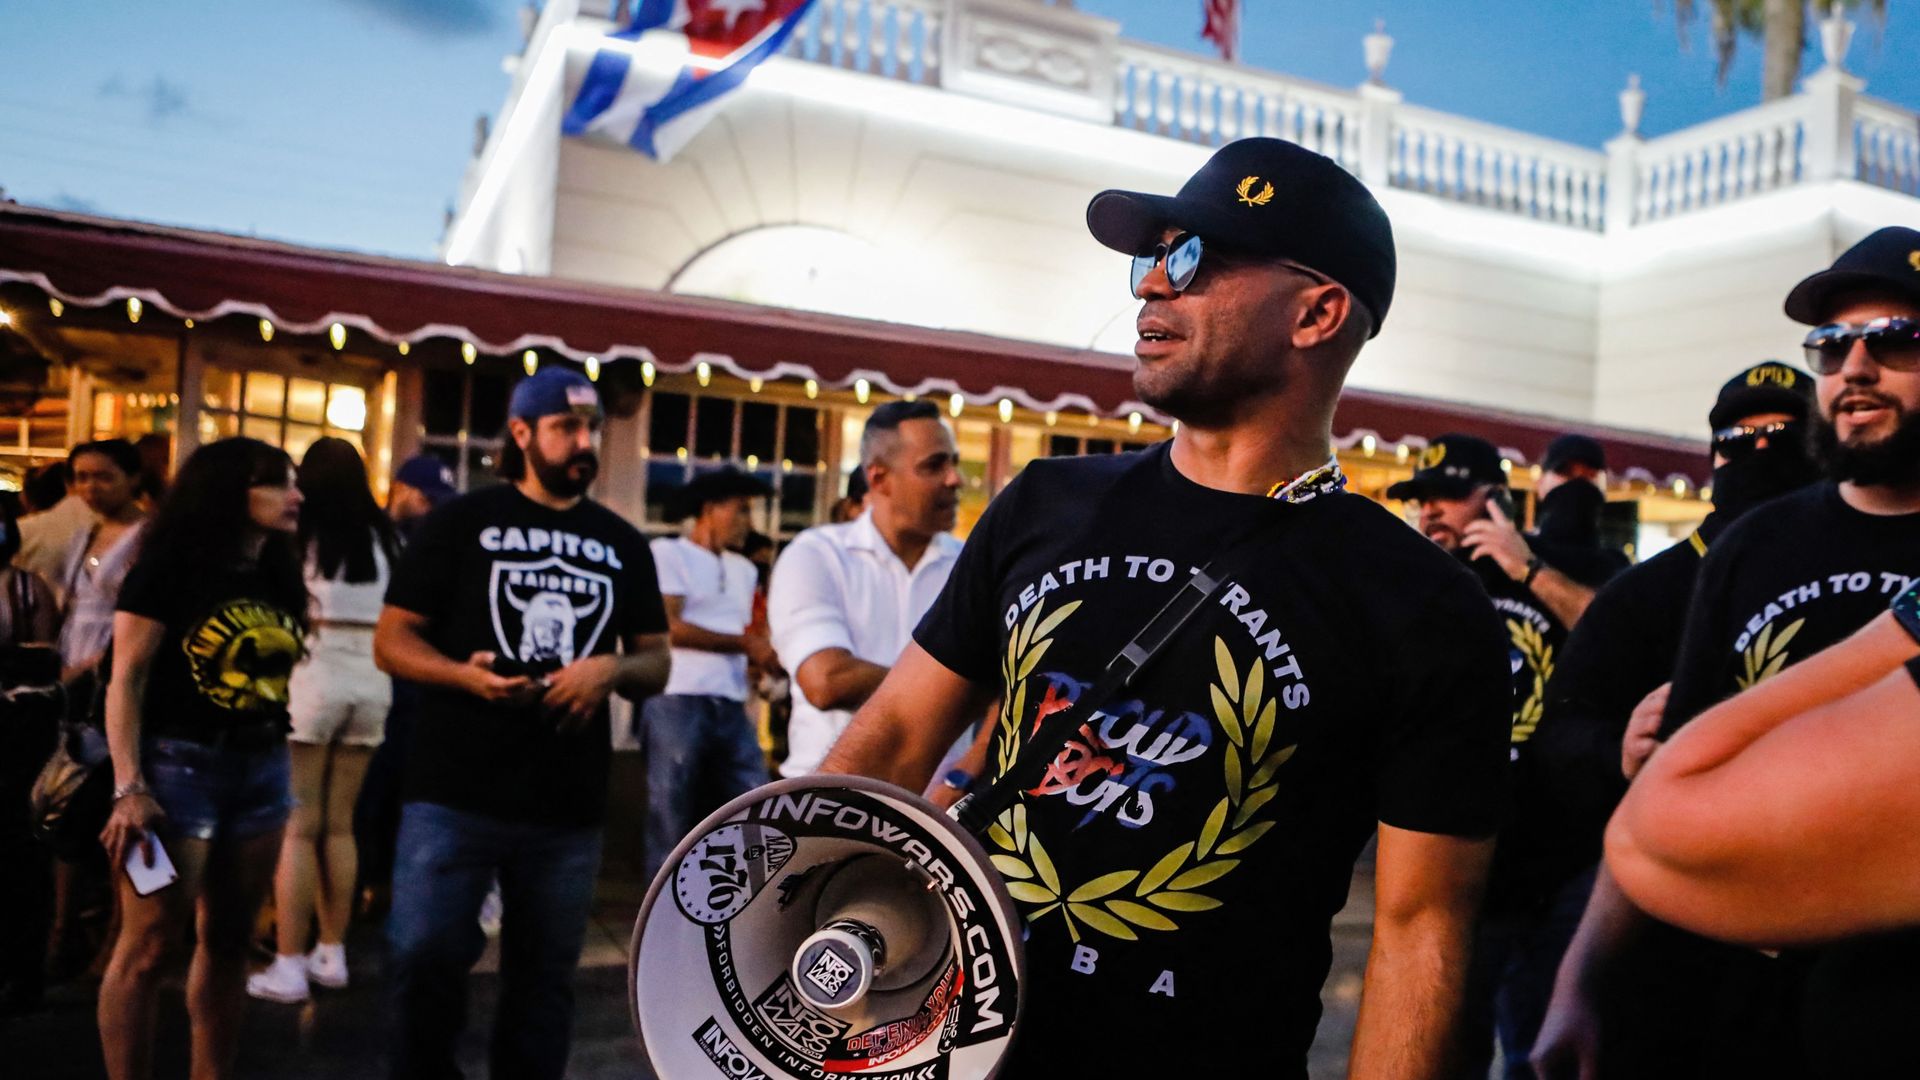 Henry "Enrique" Tarrio, leader of The Proud Boys, attends a protest showing support for Cubans demonstrating against their government, in Miami, Florida on July 16, 2021. 